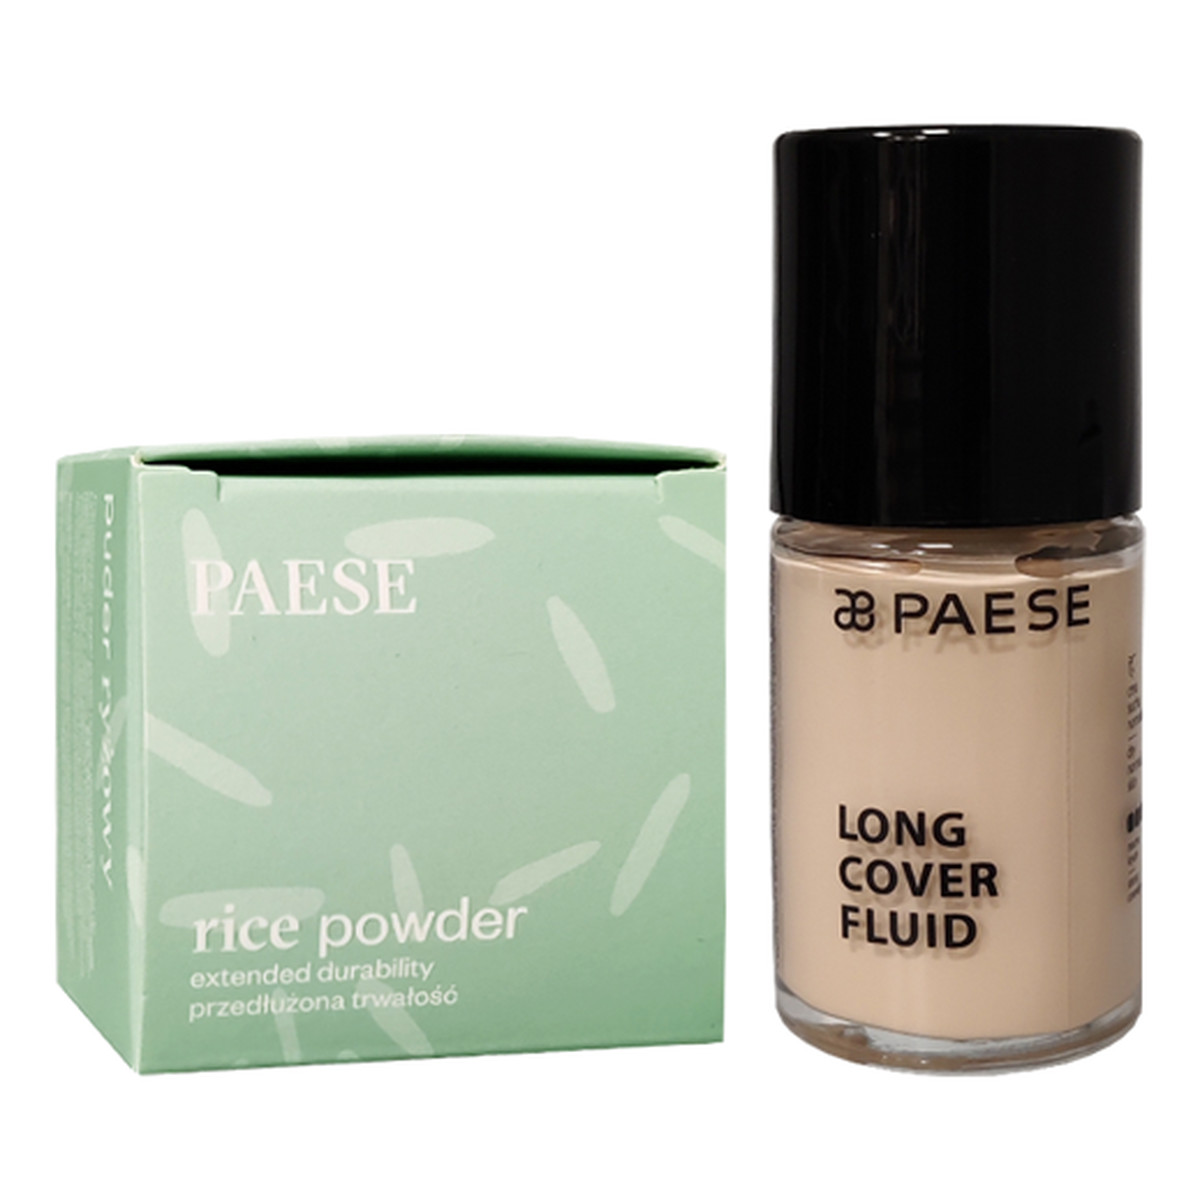 Paese Zestaw Long Cover Fluid Sand 0.25 + puder sypki ryżowy 10g